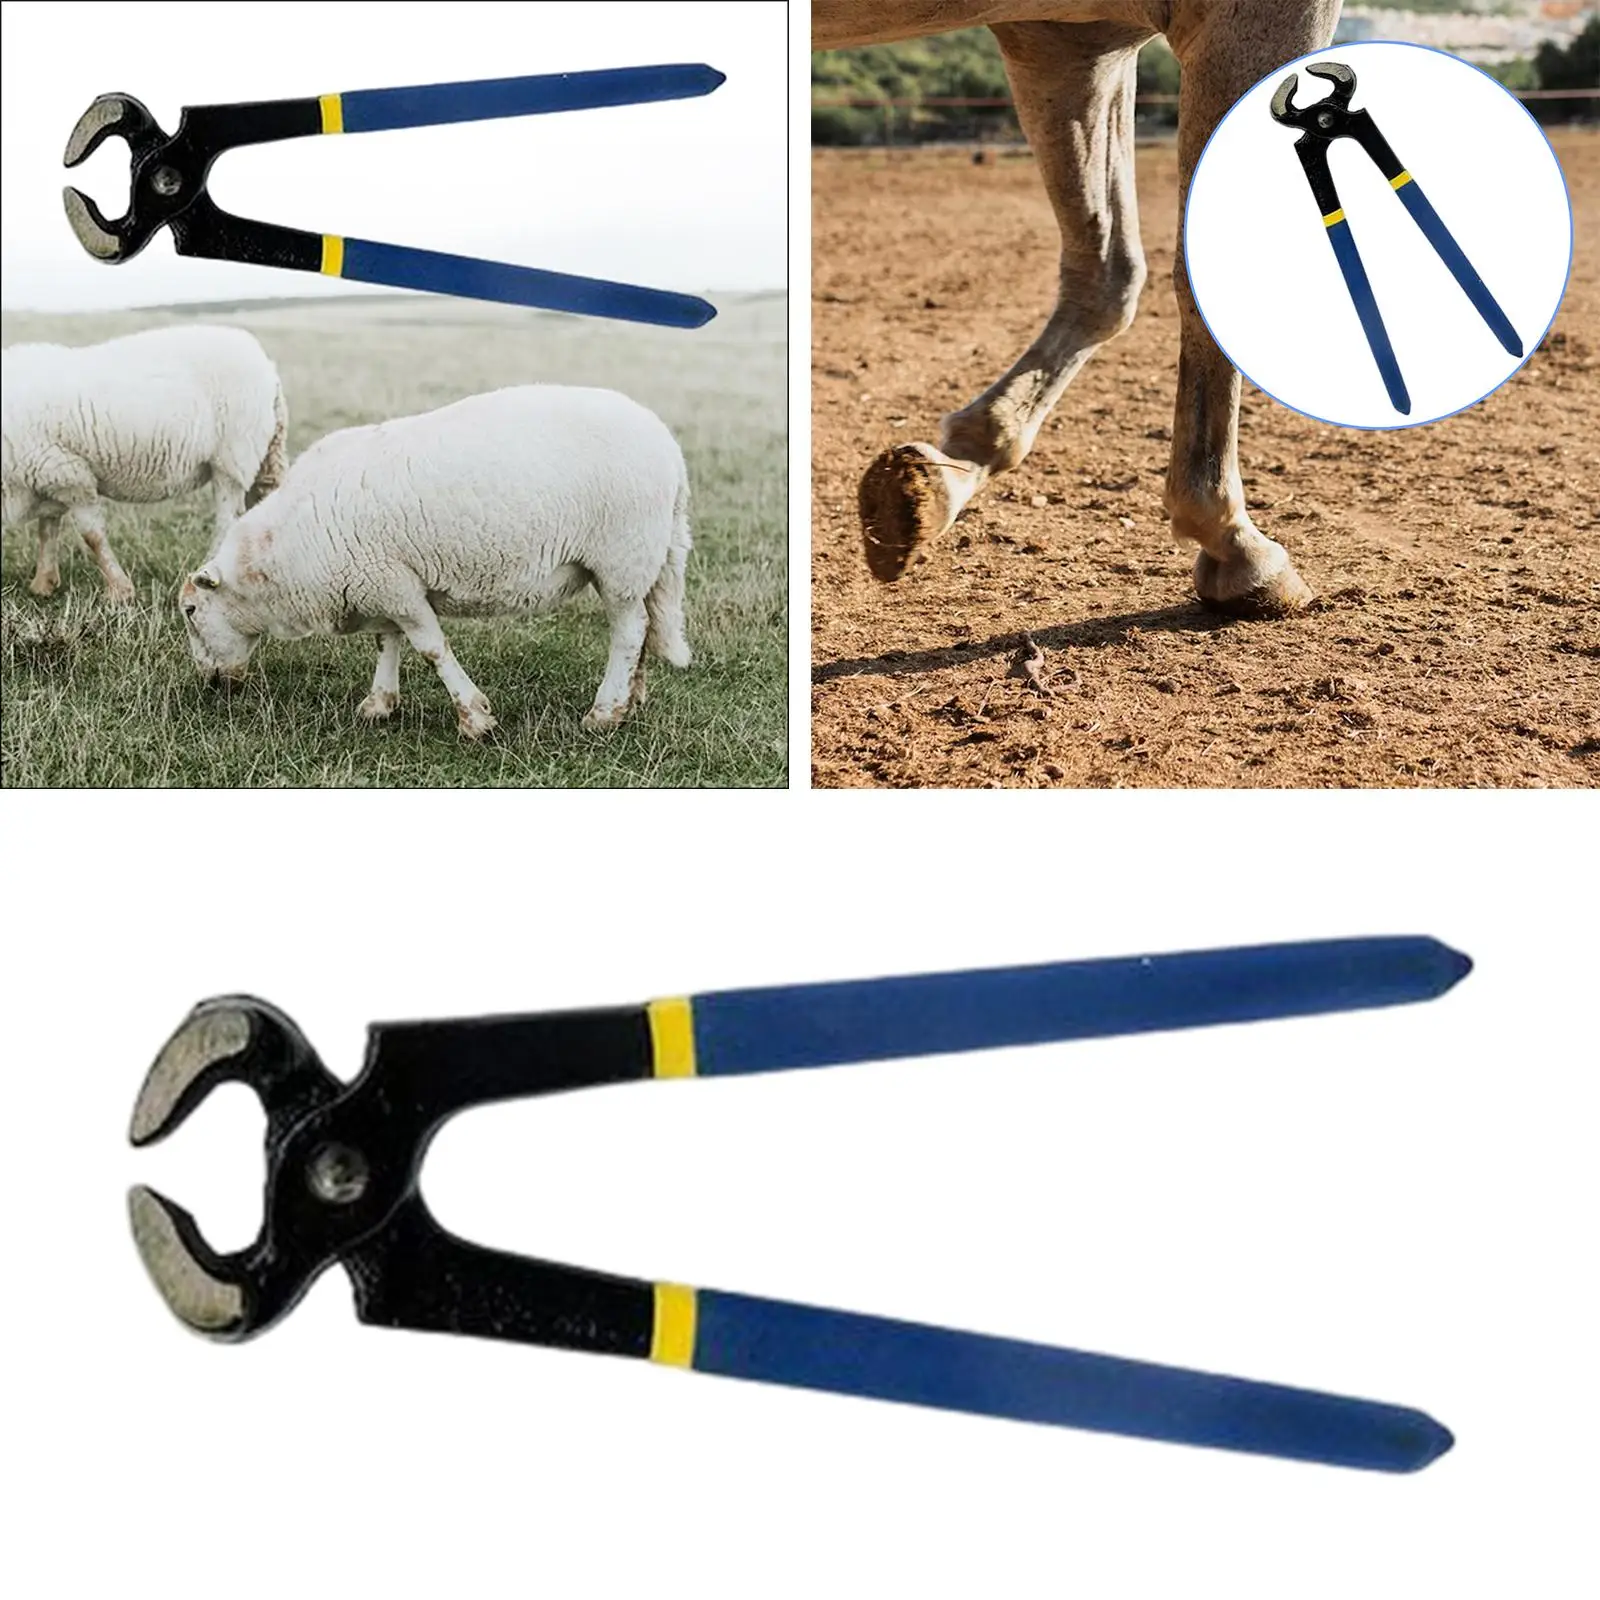 Horse Hoof Trimmer Horse Farrier Tool Metal Structure Goat Hoof Trimming Shear Hoof Nippers for Goats Sheep Cattle